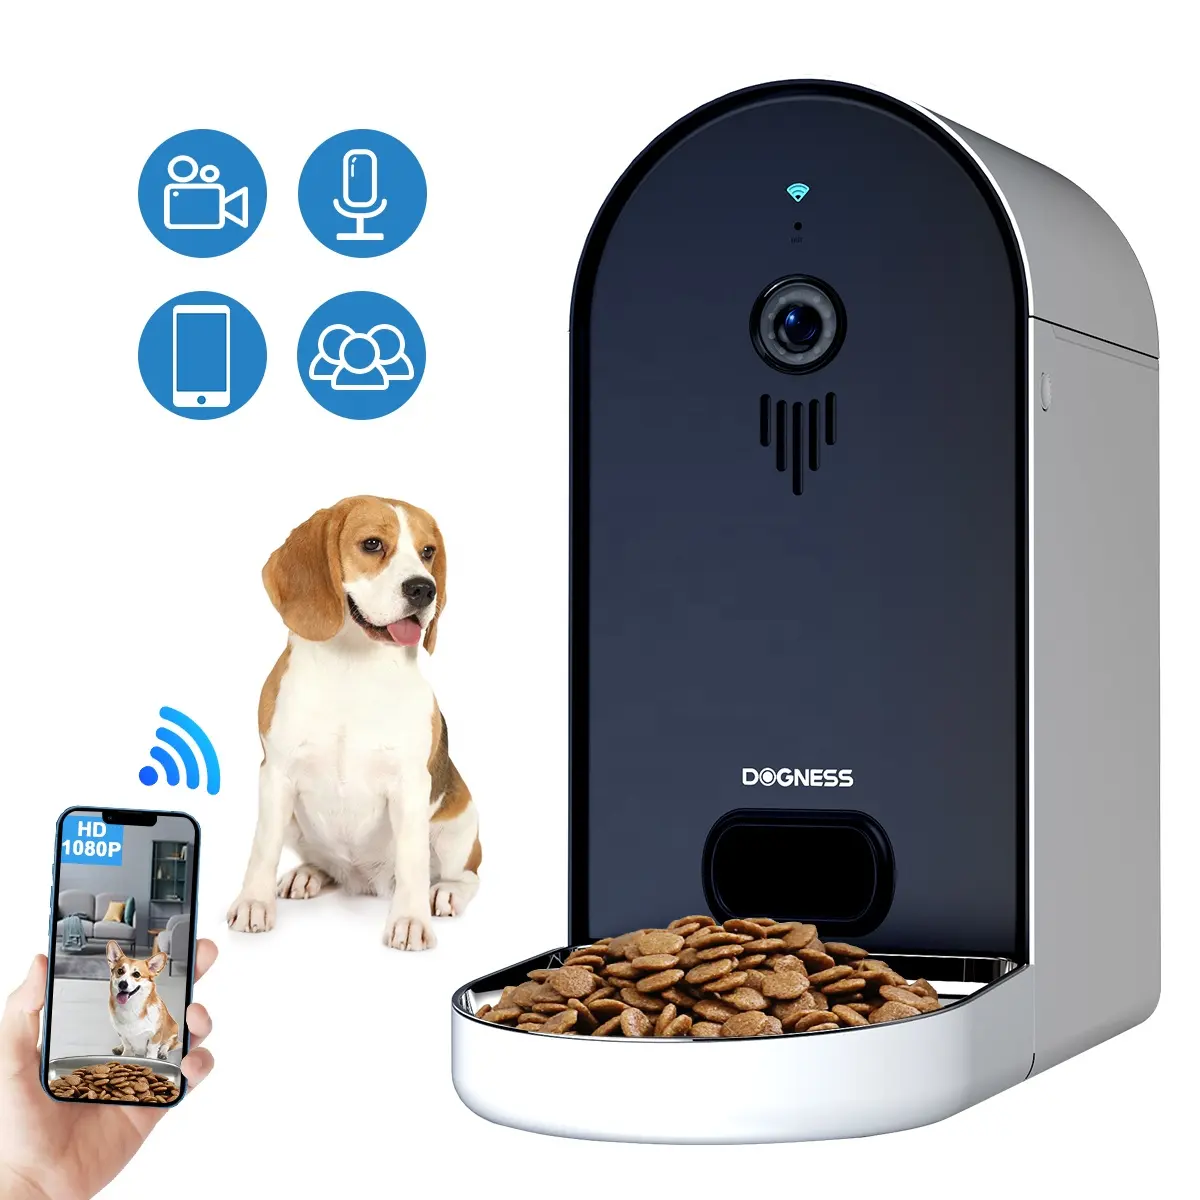 Dogness Multifunction Smart Pet Feeder App Remote Control Cat Dog Intelligent Feeder with Control Timer And Camera